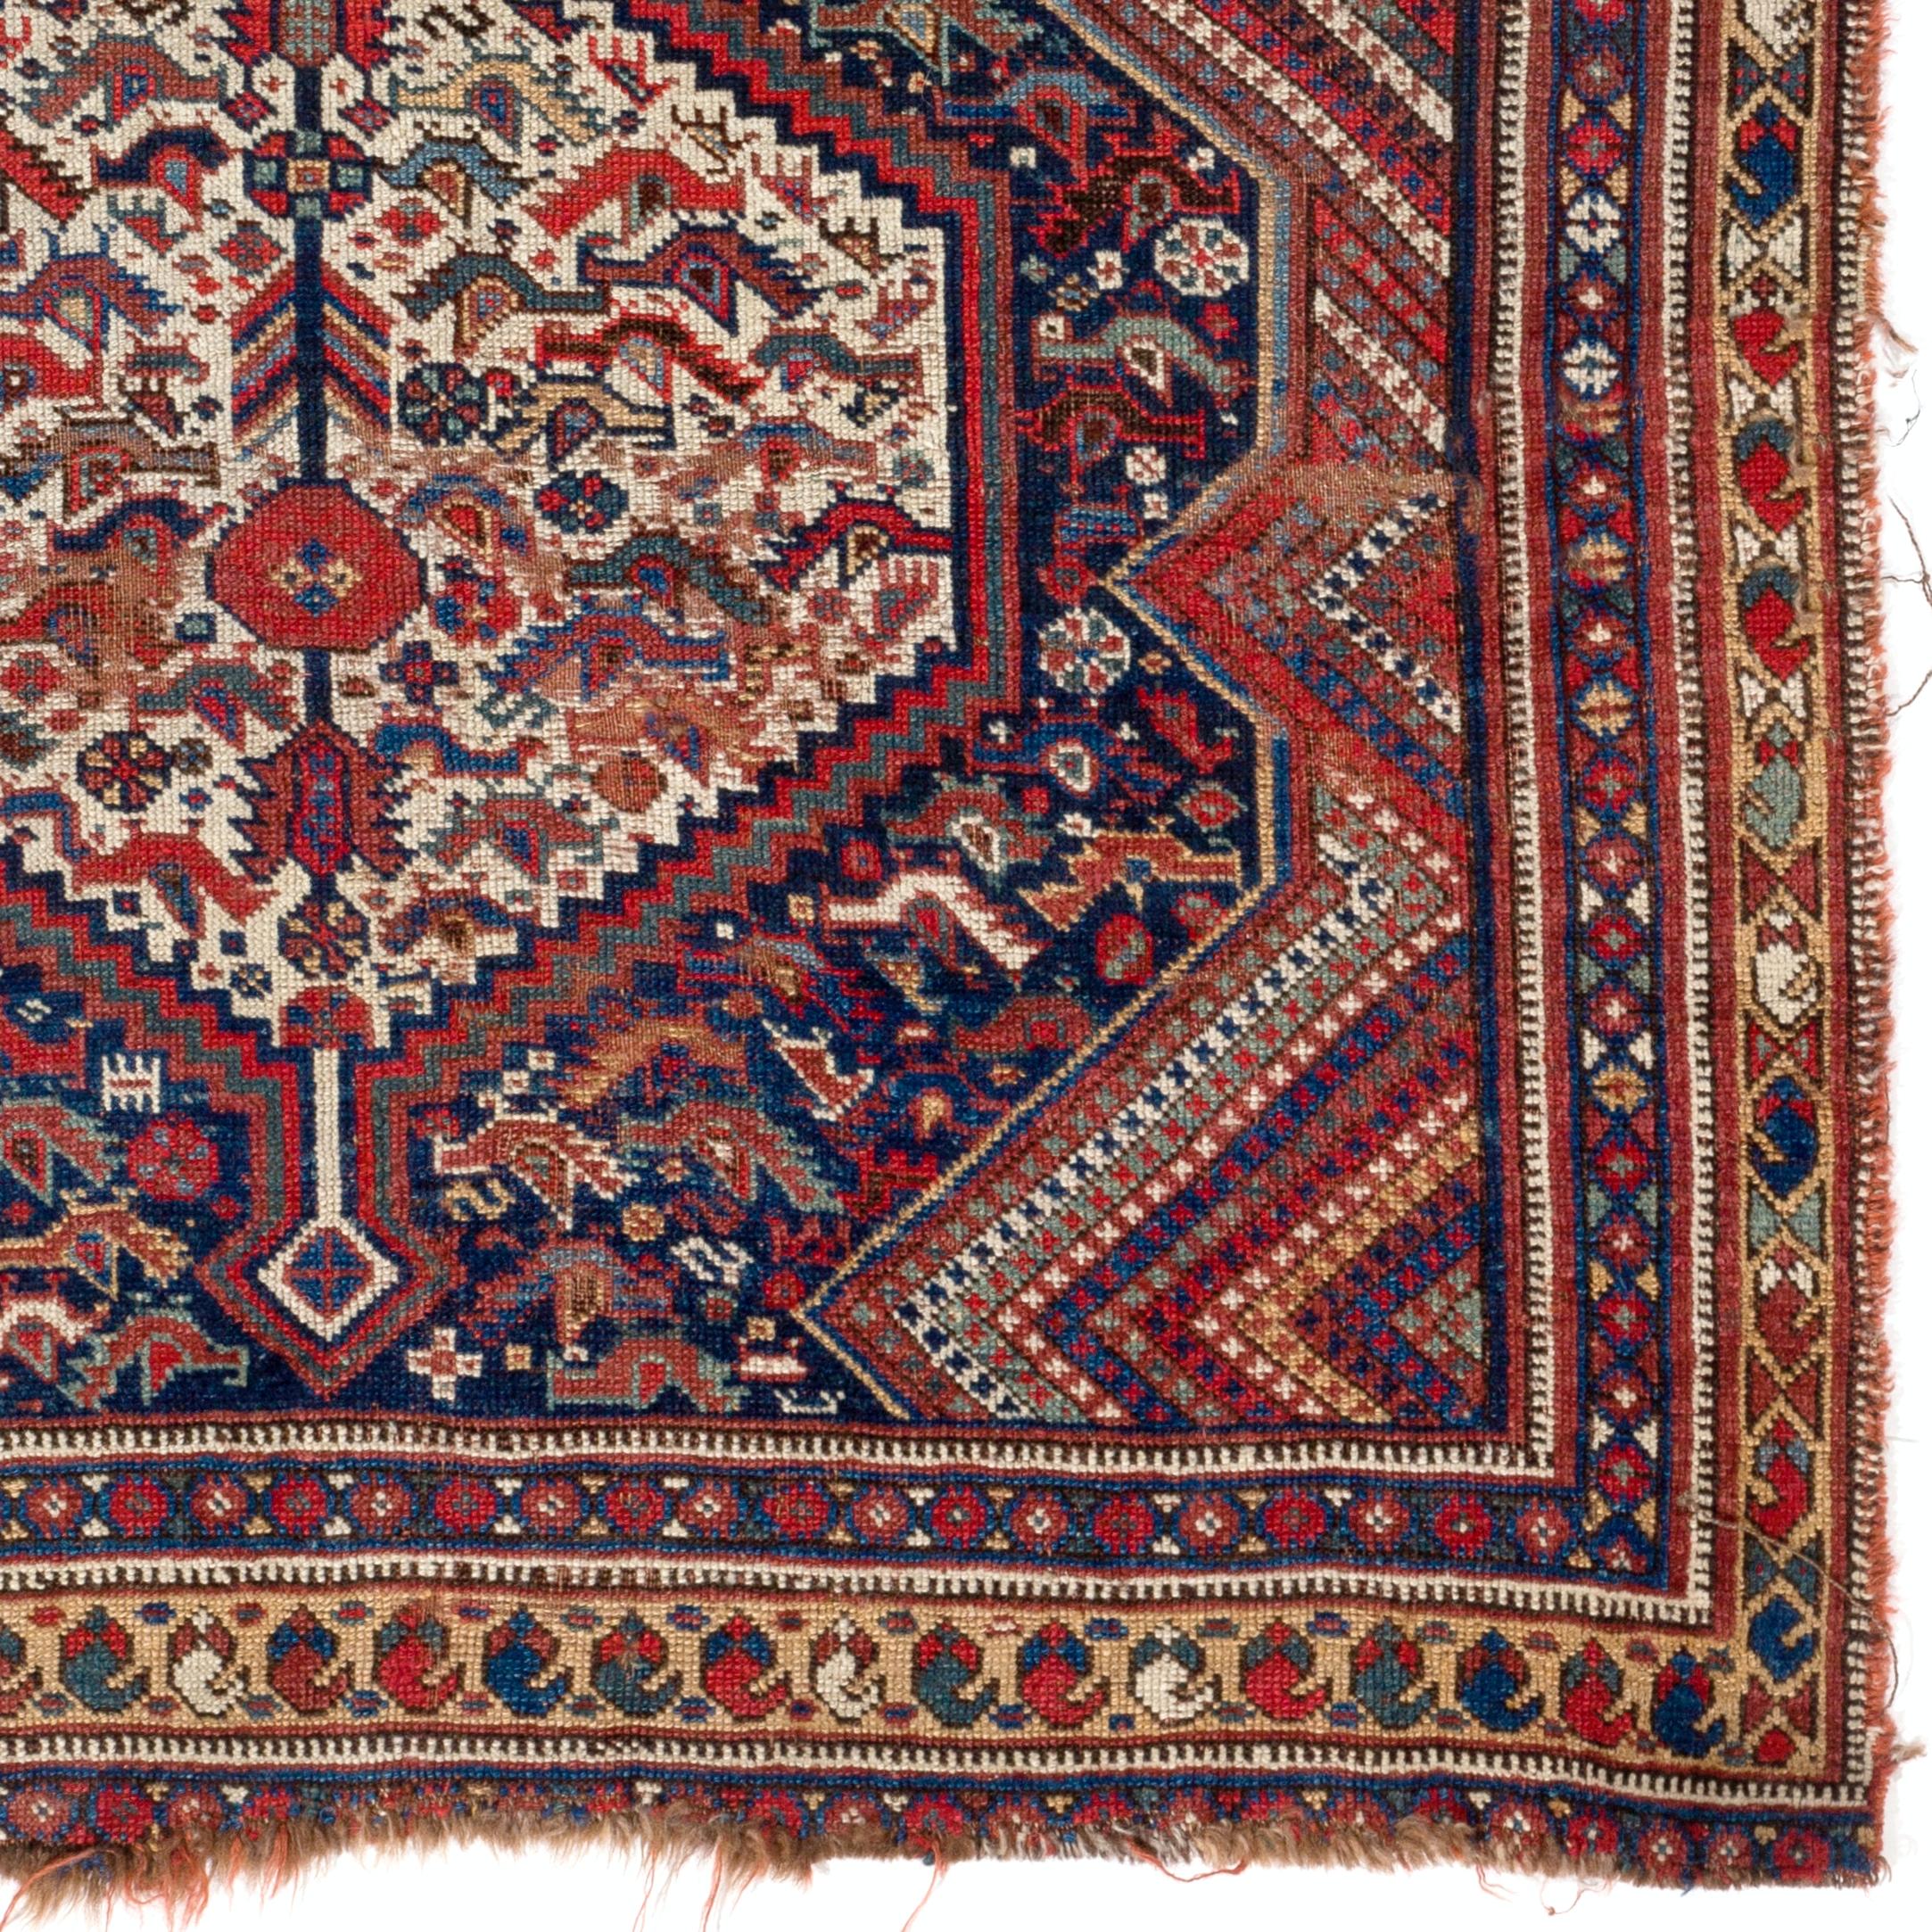 Antique Persian Shiraz Qashqai rug, hand-knotted by the pastoral nomadic Qashqai people in the 19th century made with wool on wool foundation and natural vegetable dyes. 